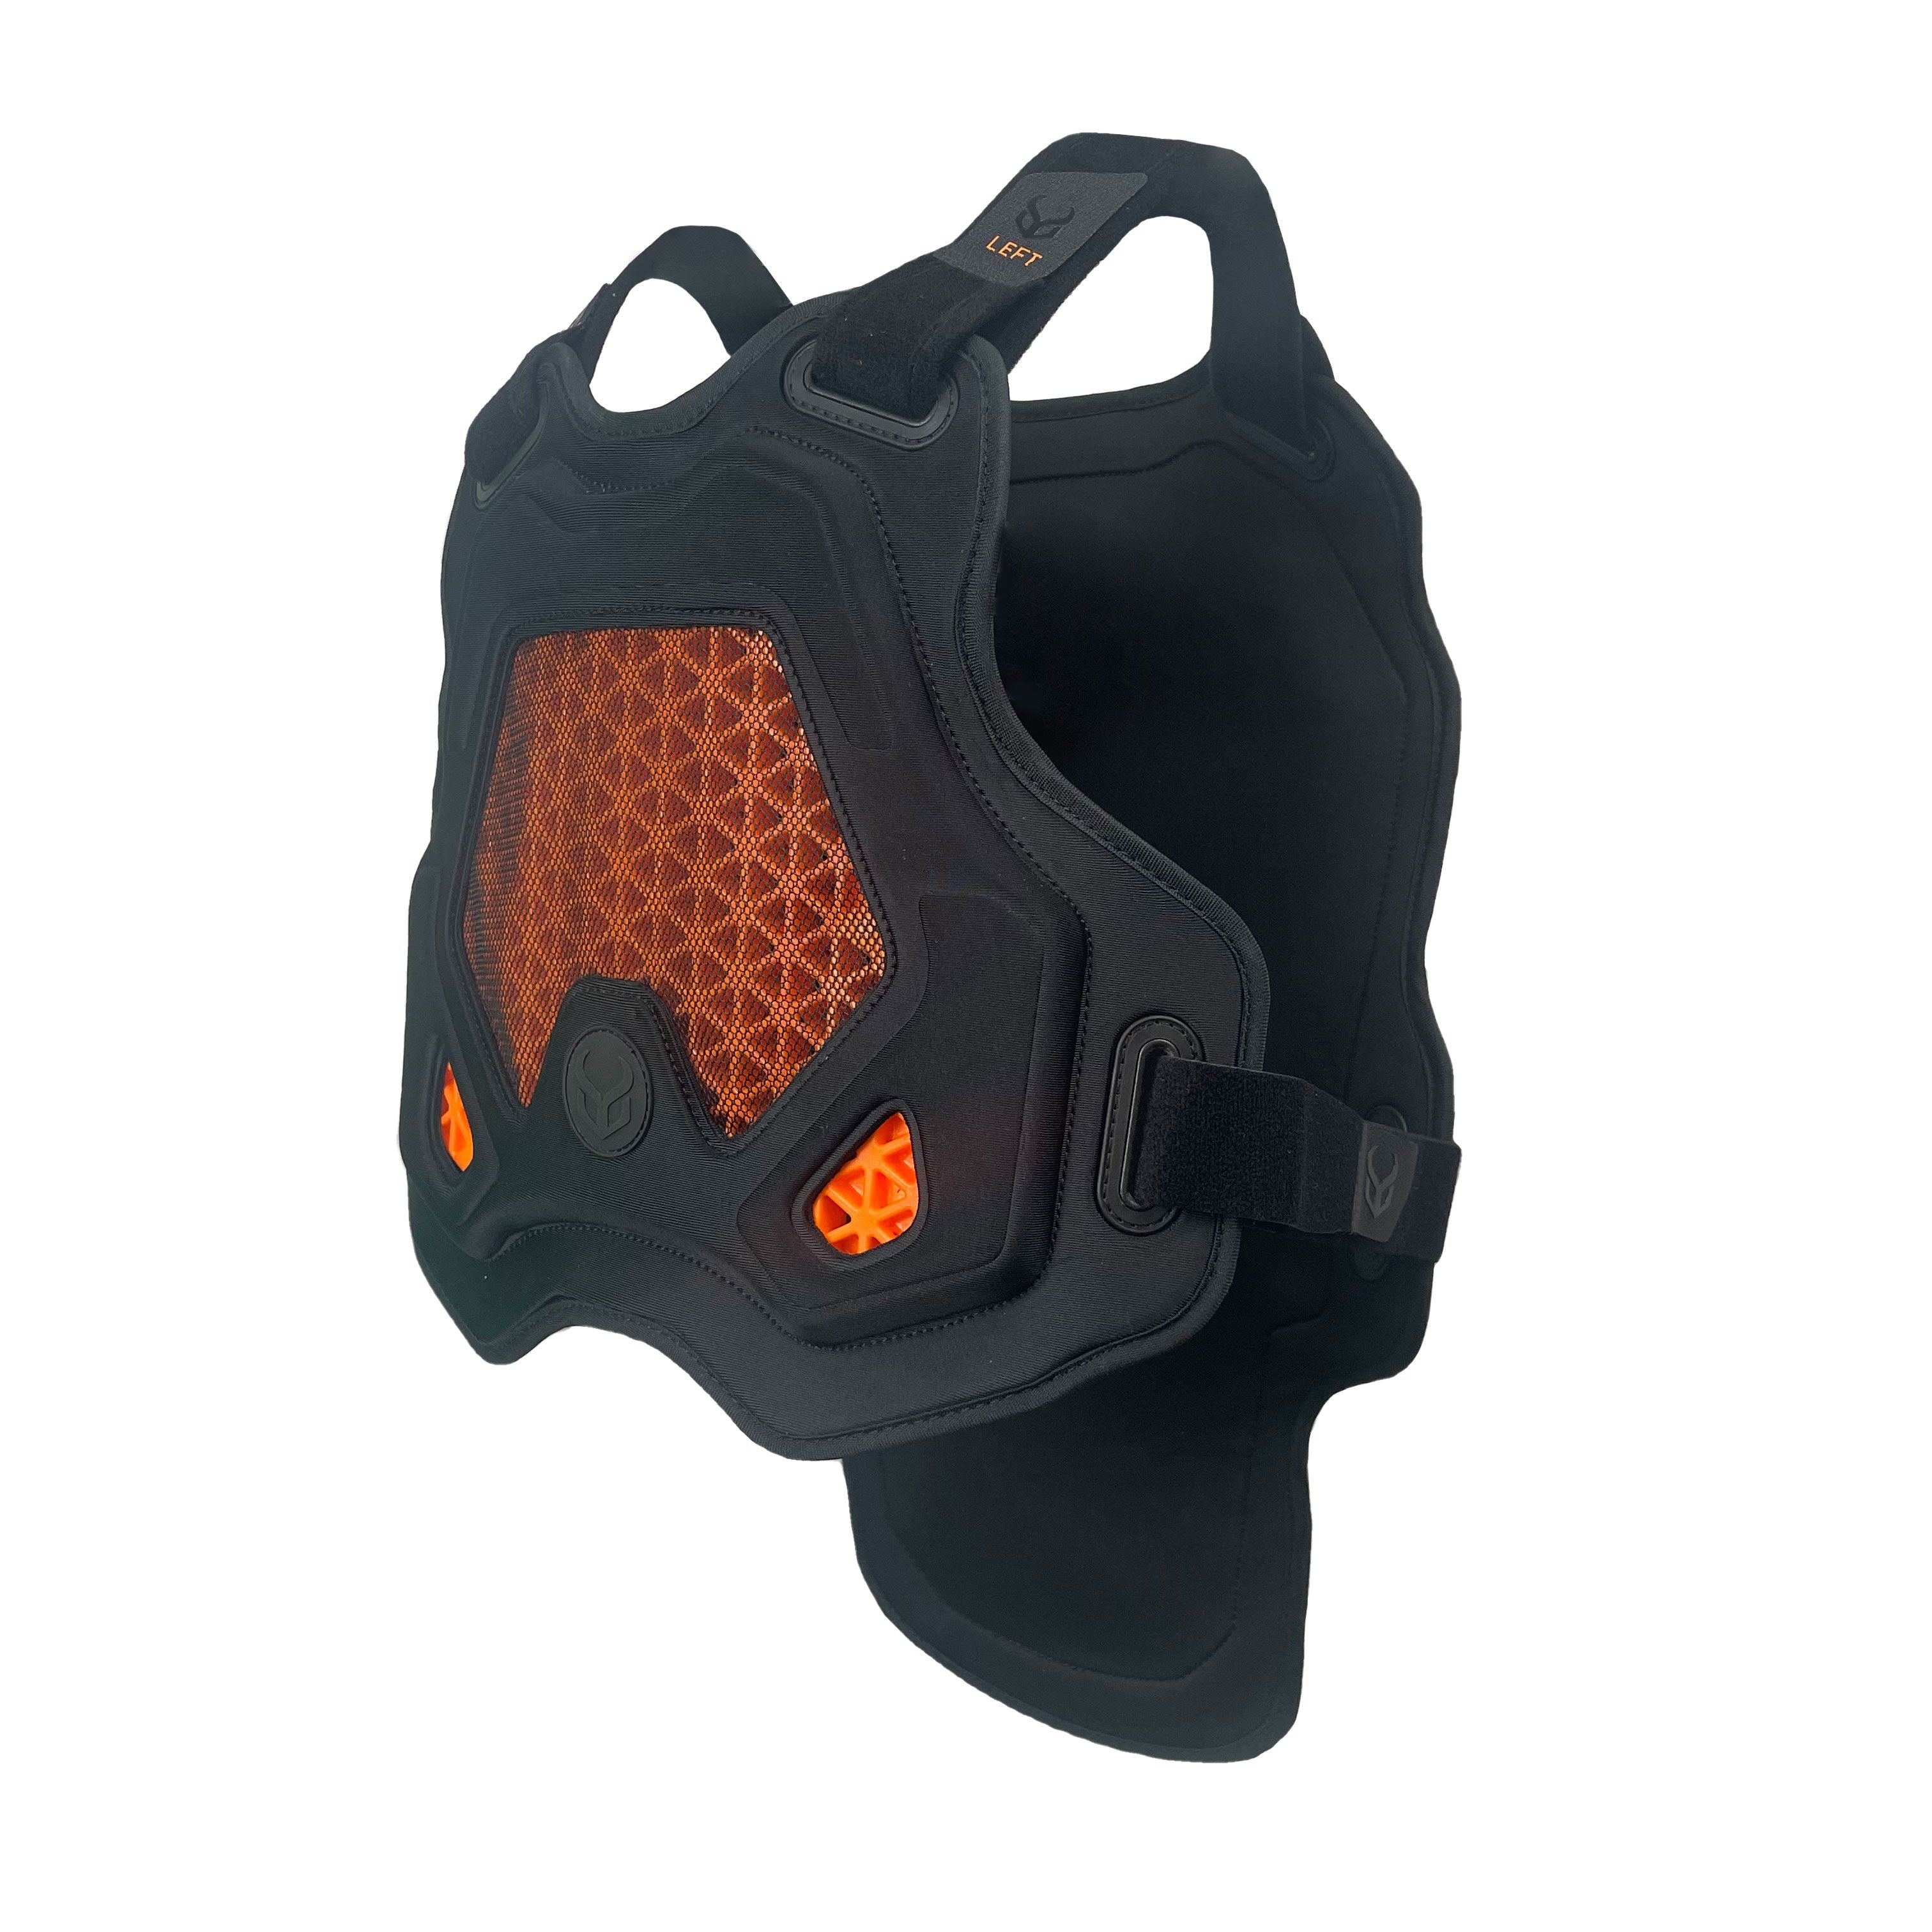 Demon Ghost D3O Chest and Back Protector